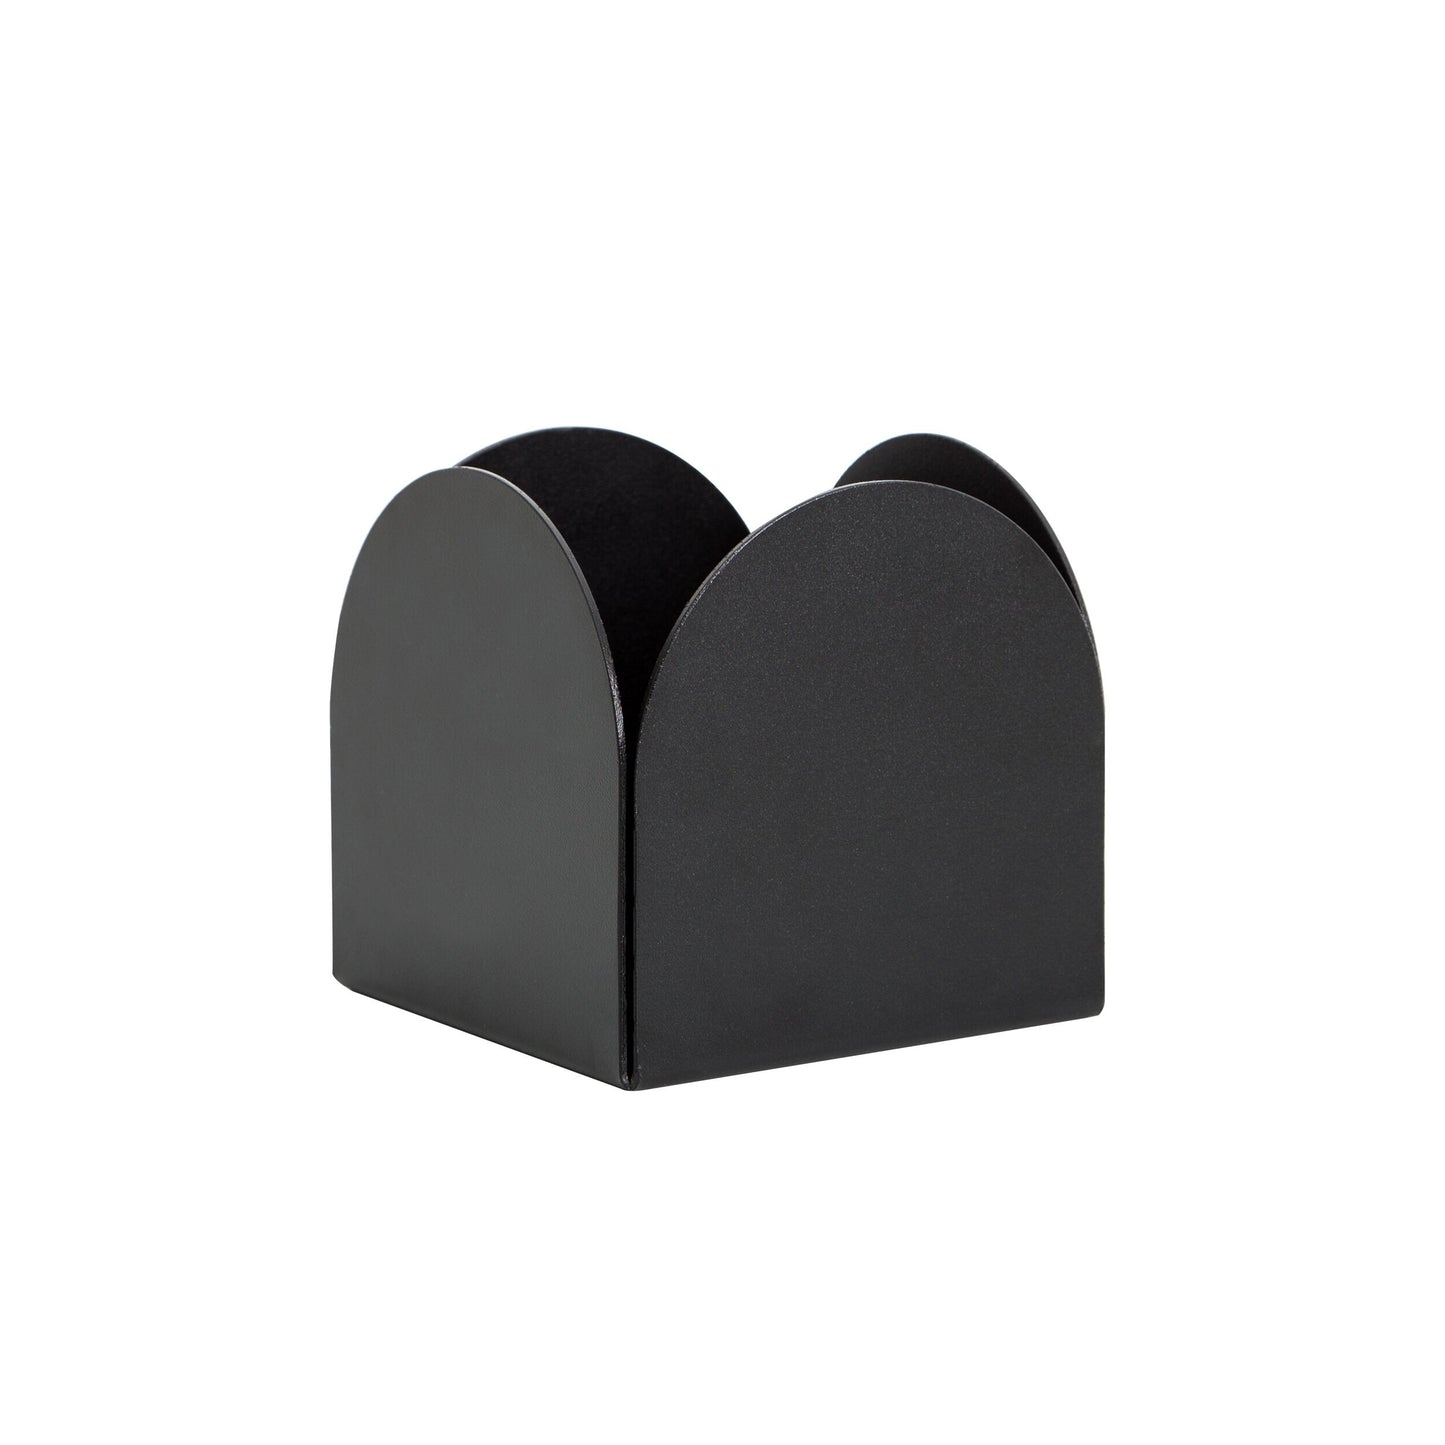 Fold Arch Pot Black by Made of Tomorrow